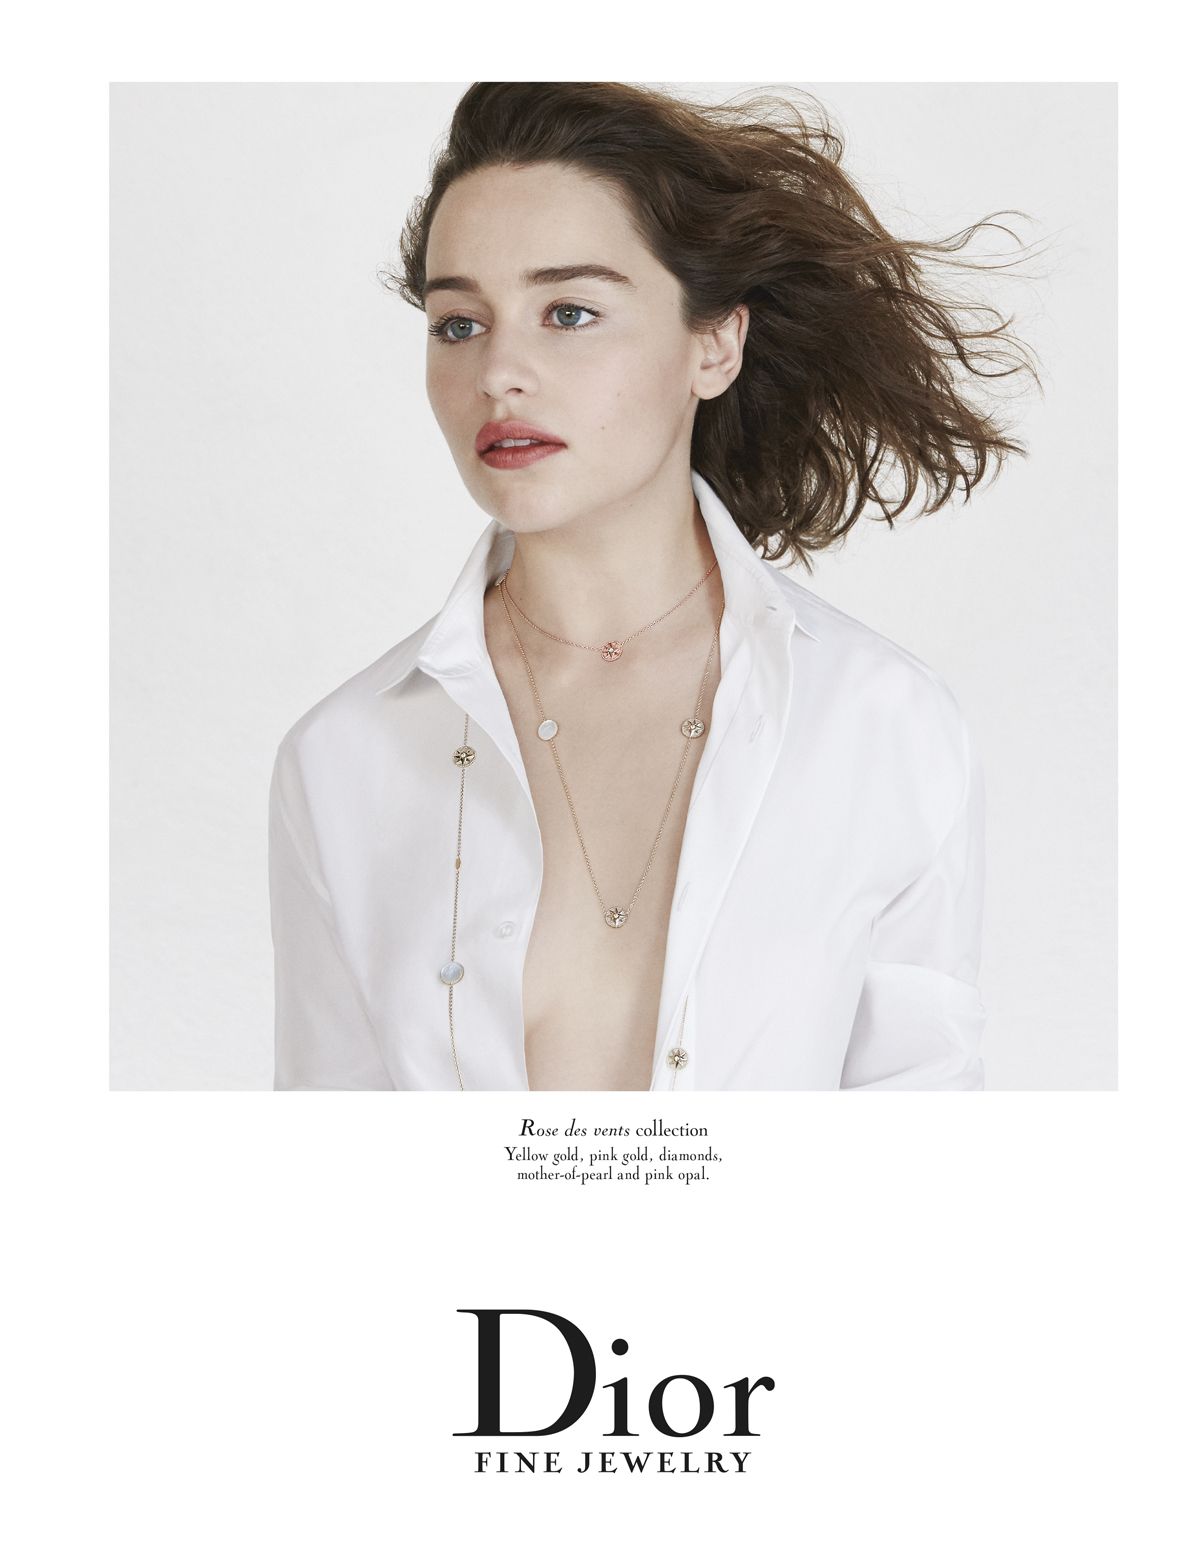 Game of Thrones' Emilia Clarke Is the New Face of Dior